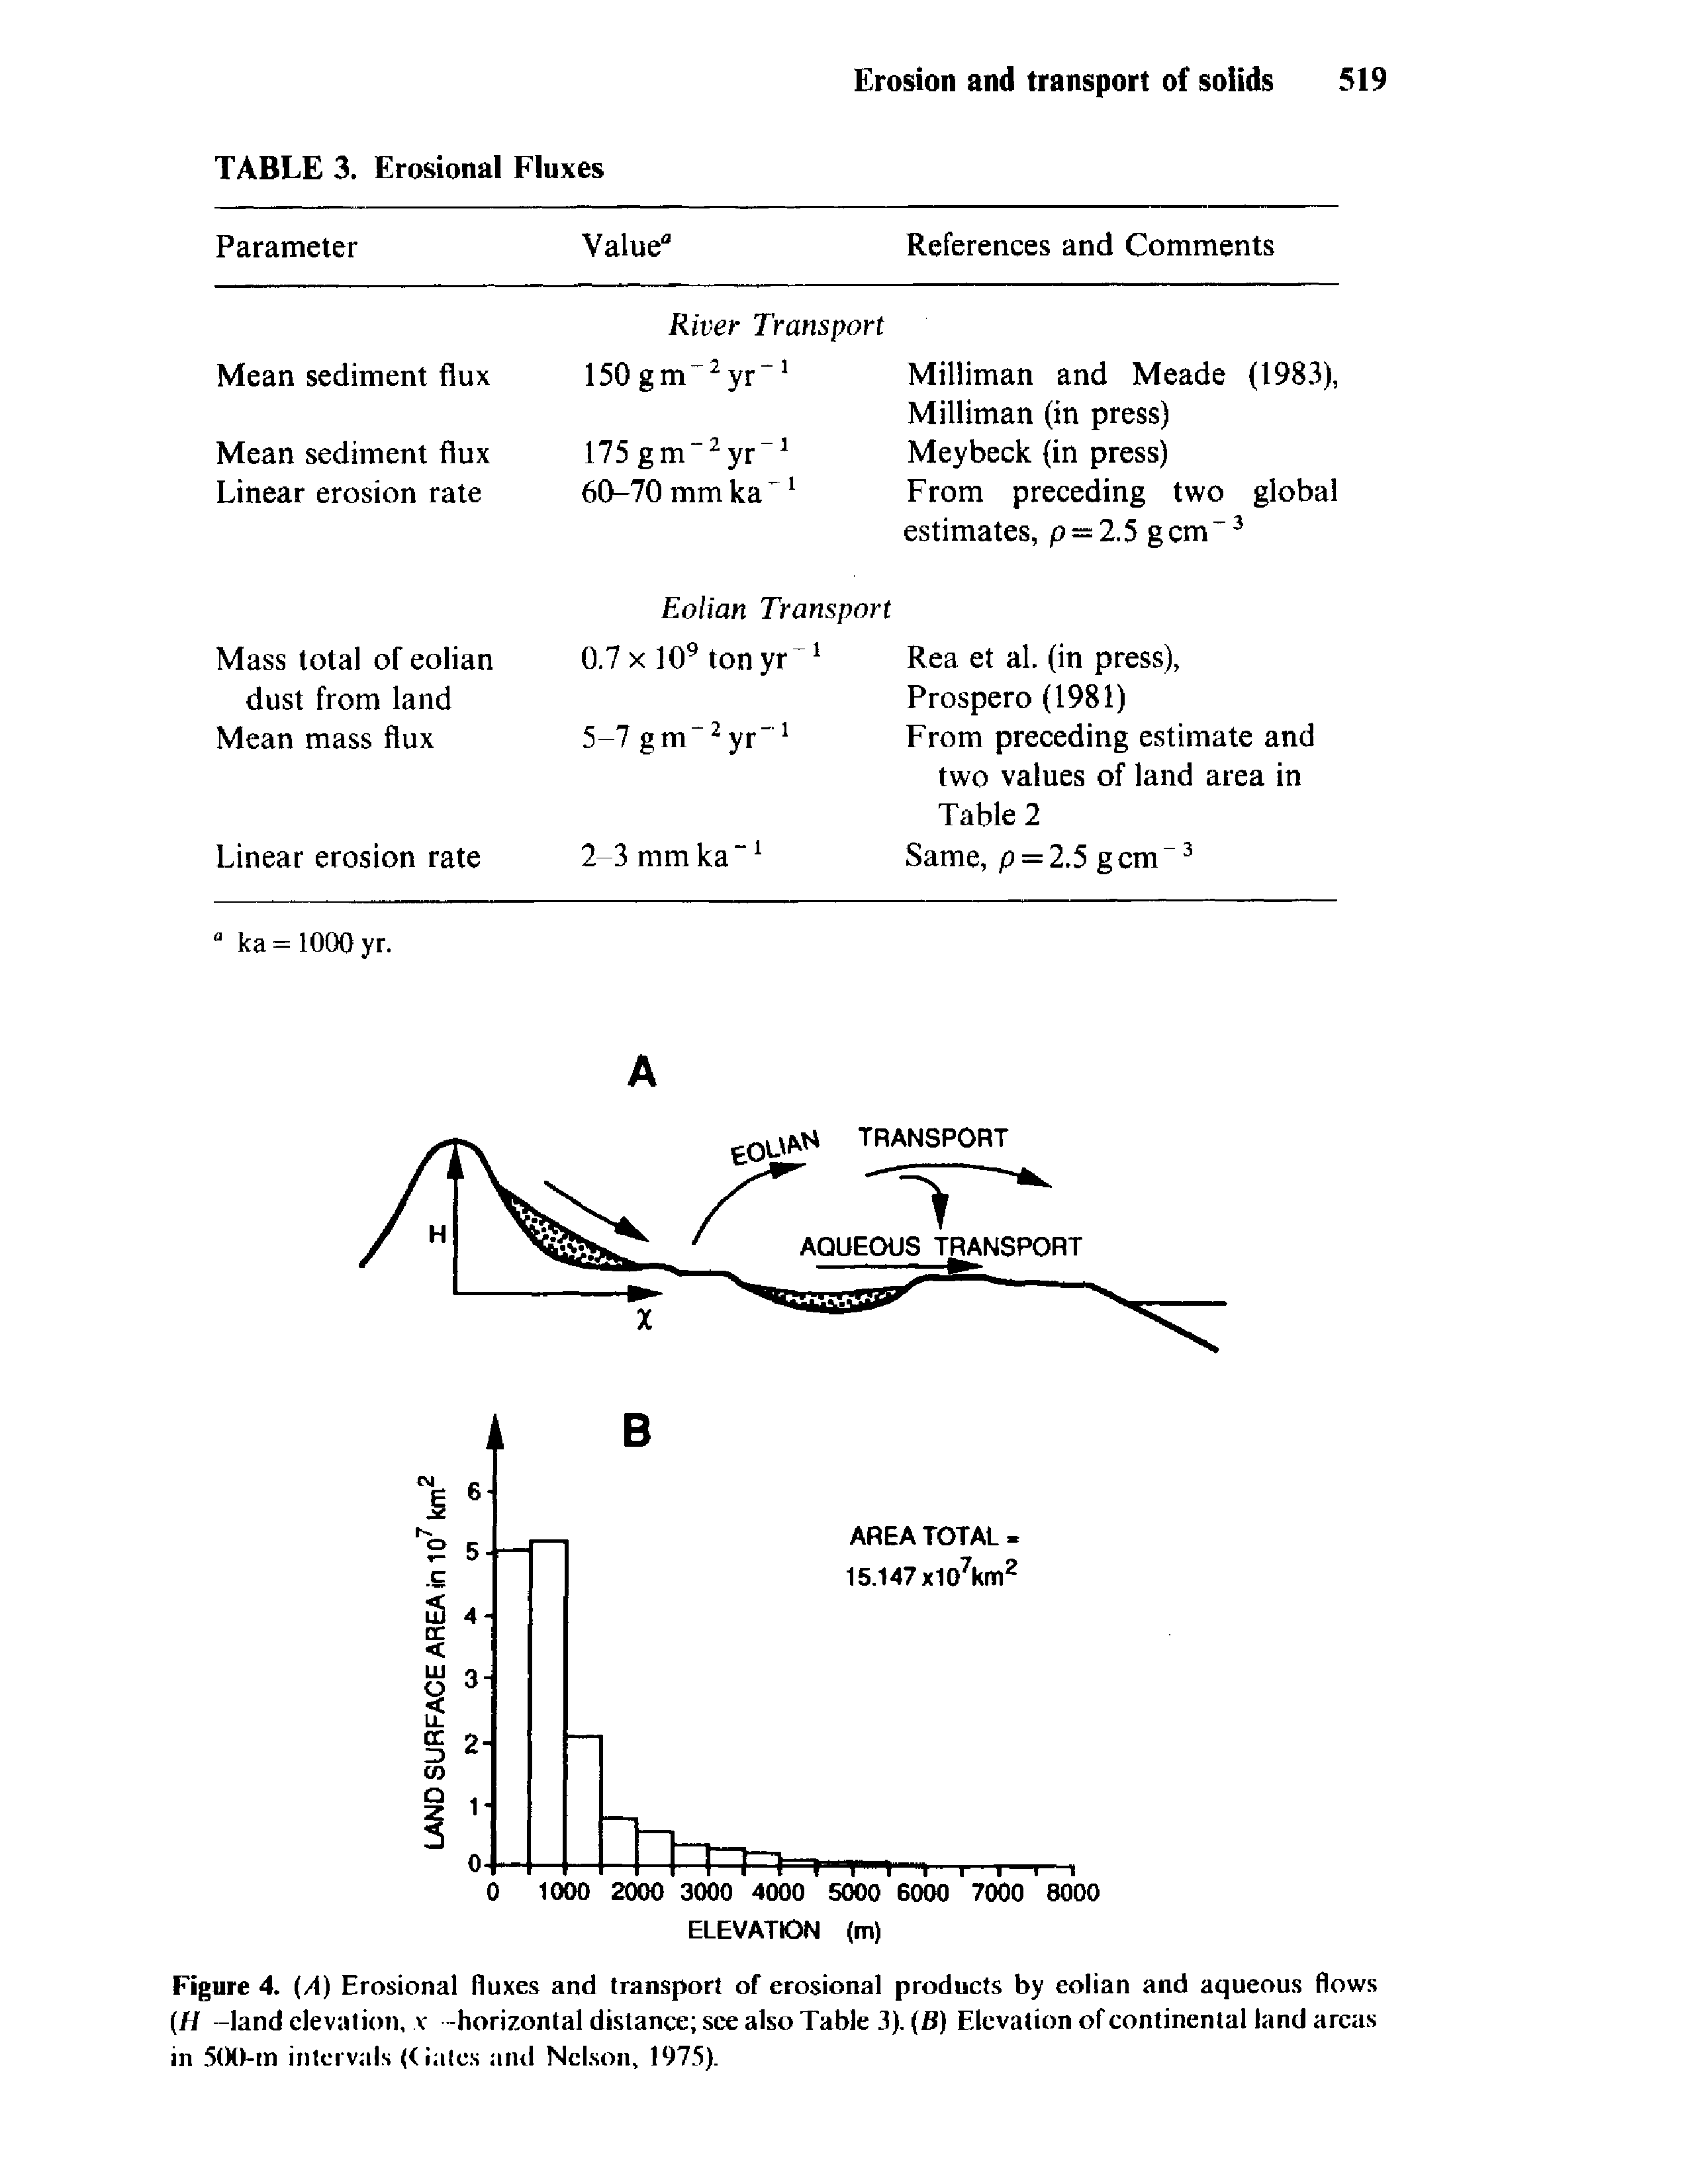 Figure 4. (A) Erosional fluxes and transport of erosional products by eolian and aqueous flows (// -land elevation, v -horizontal distance see also Table 3). (B) Elevation of continental land areas in 5(K)-m intervals ((iates and Nelson, 1975).